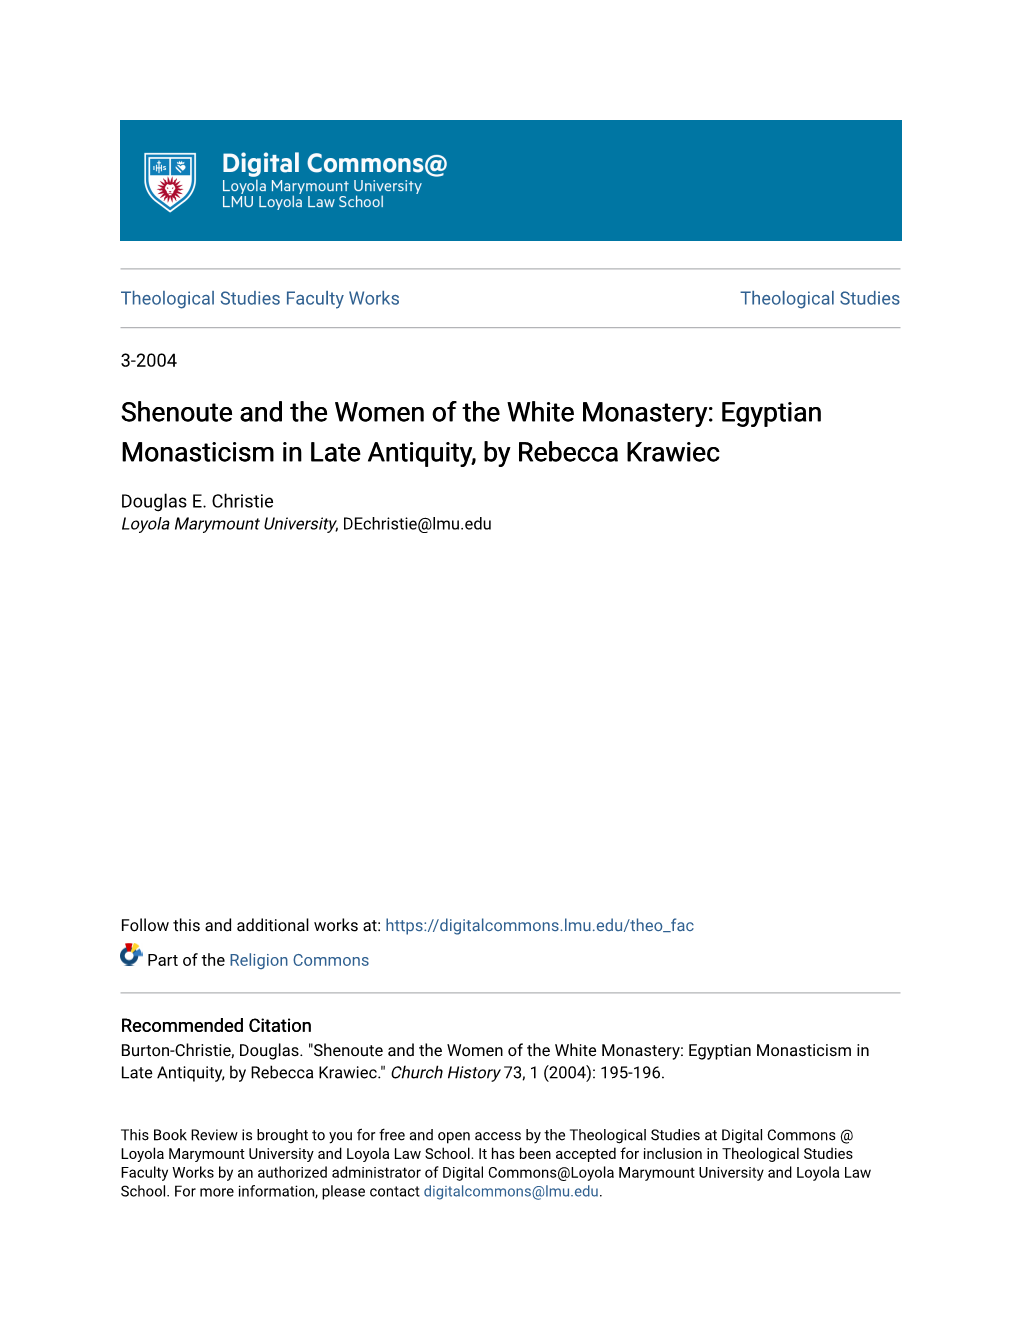 Shenoute and the Women of the White Monastery: Egyptian Monasticism in Late Antiquity, by Rebecca Krawiec